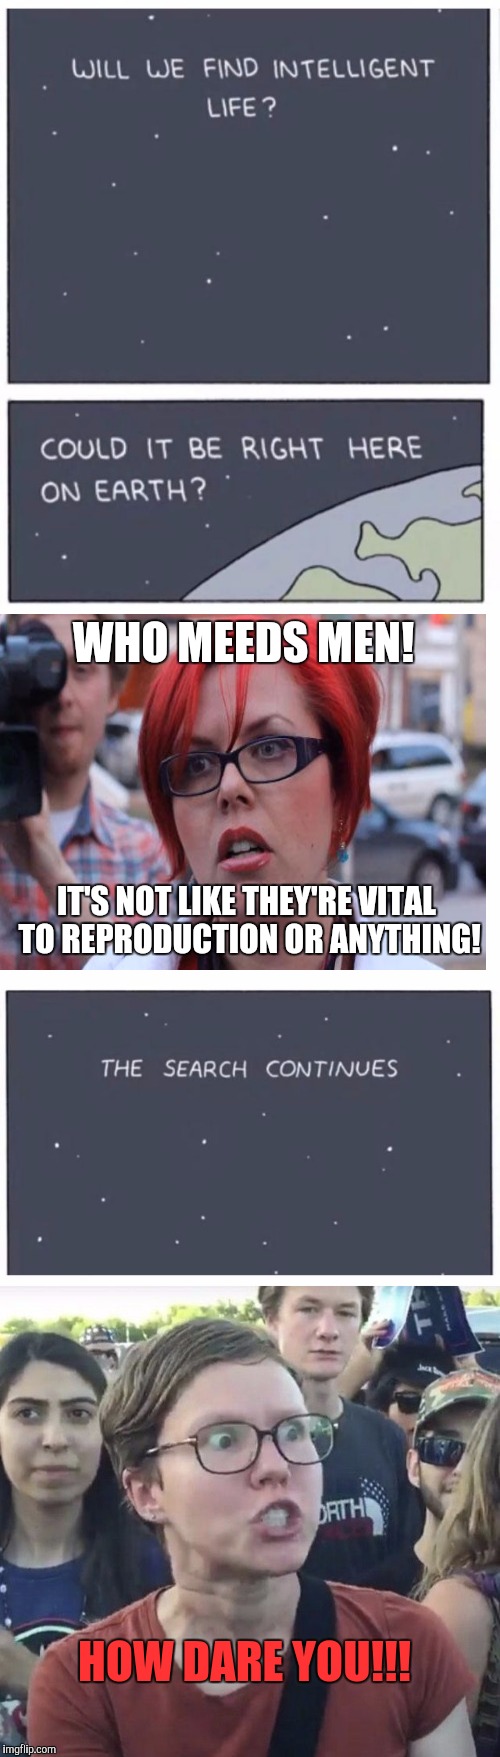 We should really stop checking earth for intelligent life  | WHO MEEDS MEN! IT'S NOT LIKE THEY'RE VITAL TO REPRODUCTION OR ANYTHING! HOW DARE YOU!!! | image tagged in the search continues | made w/ Imgflip meme maker